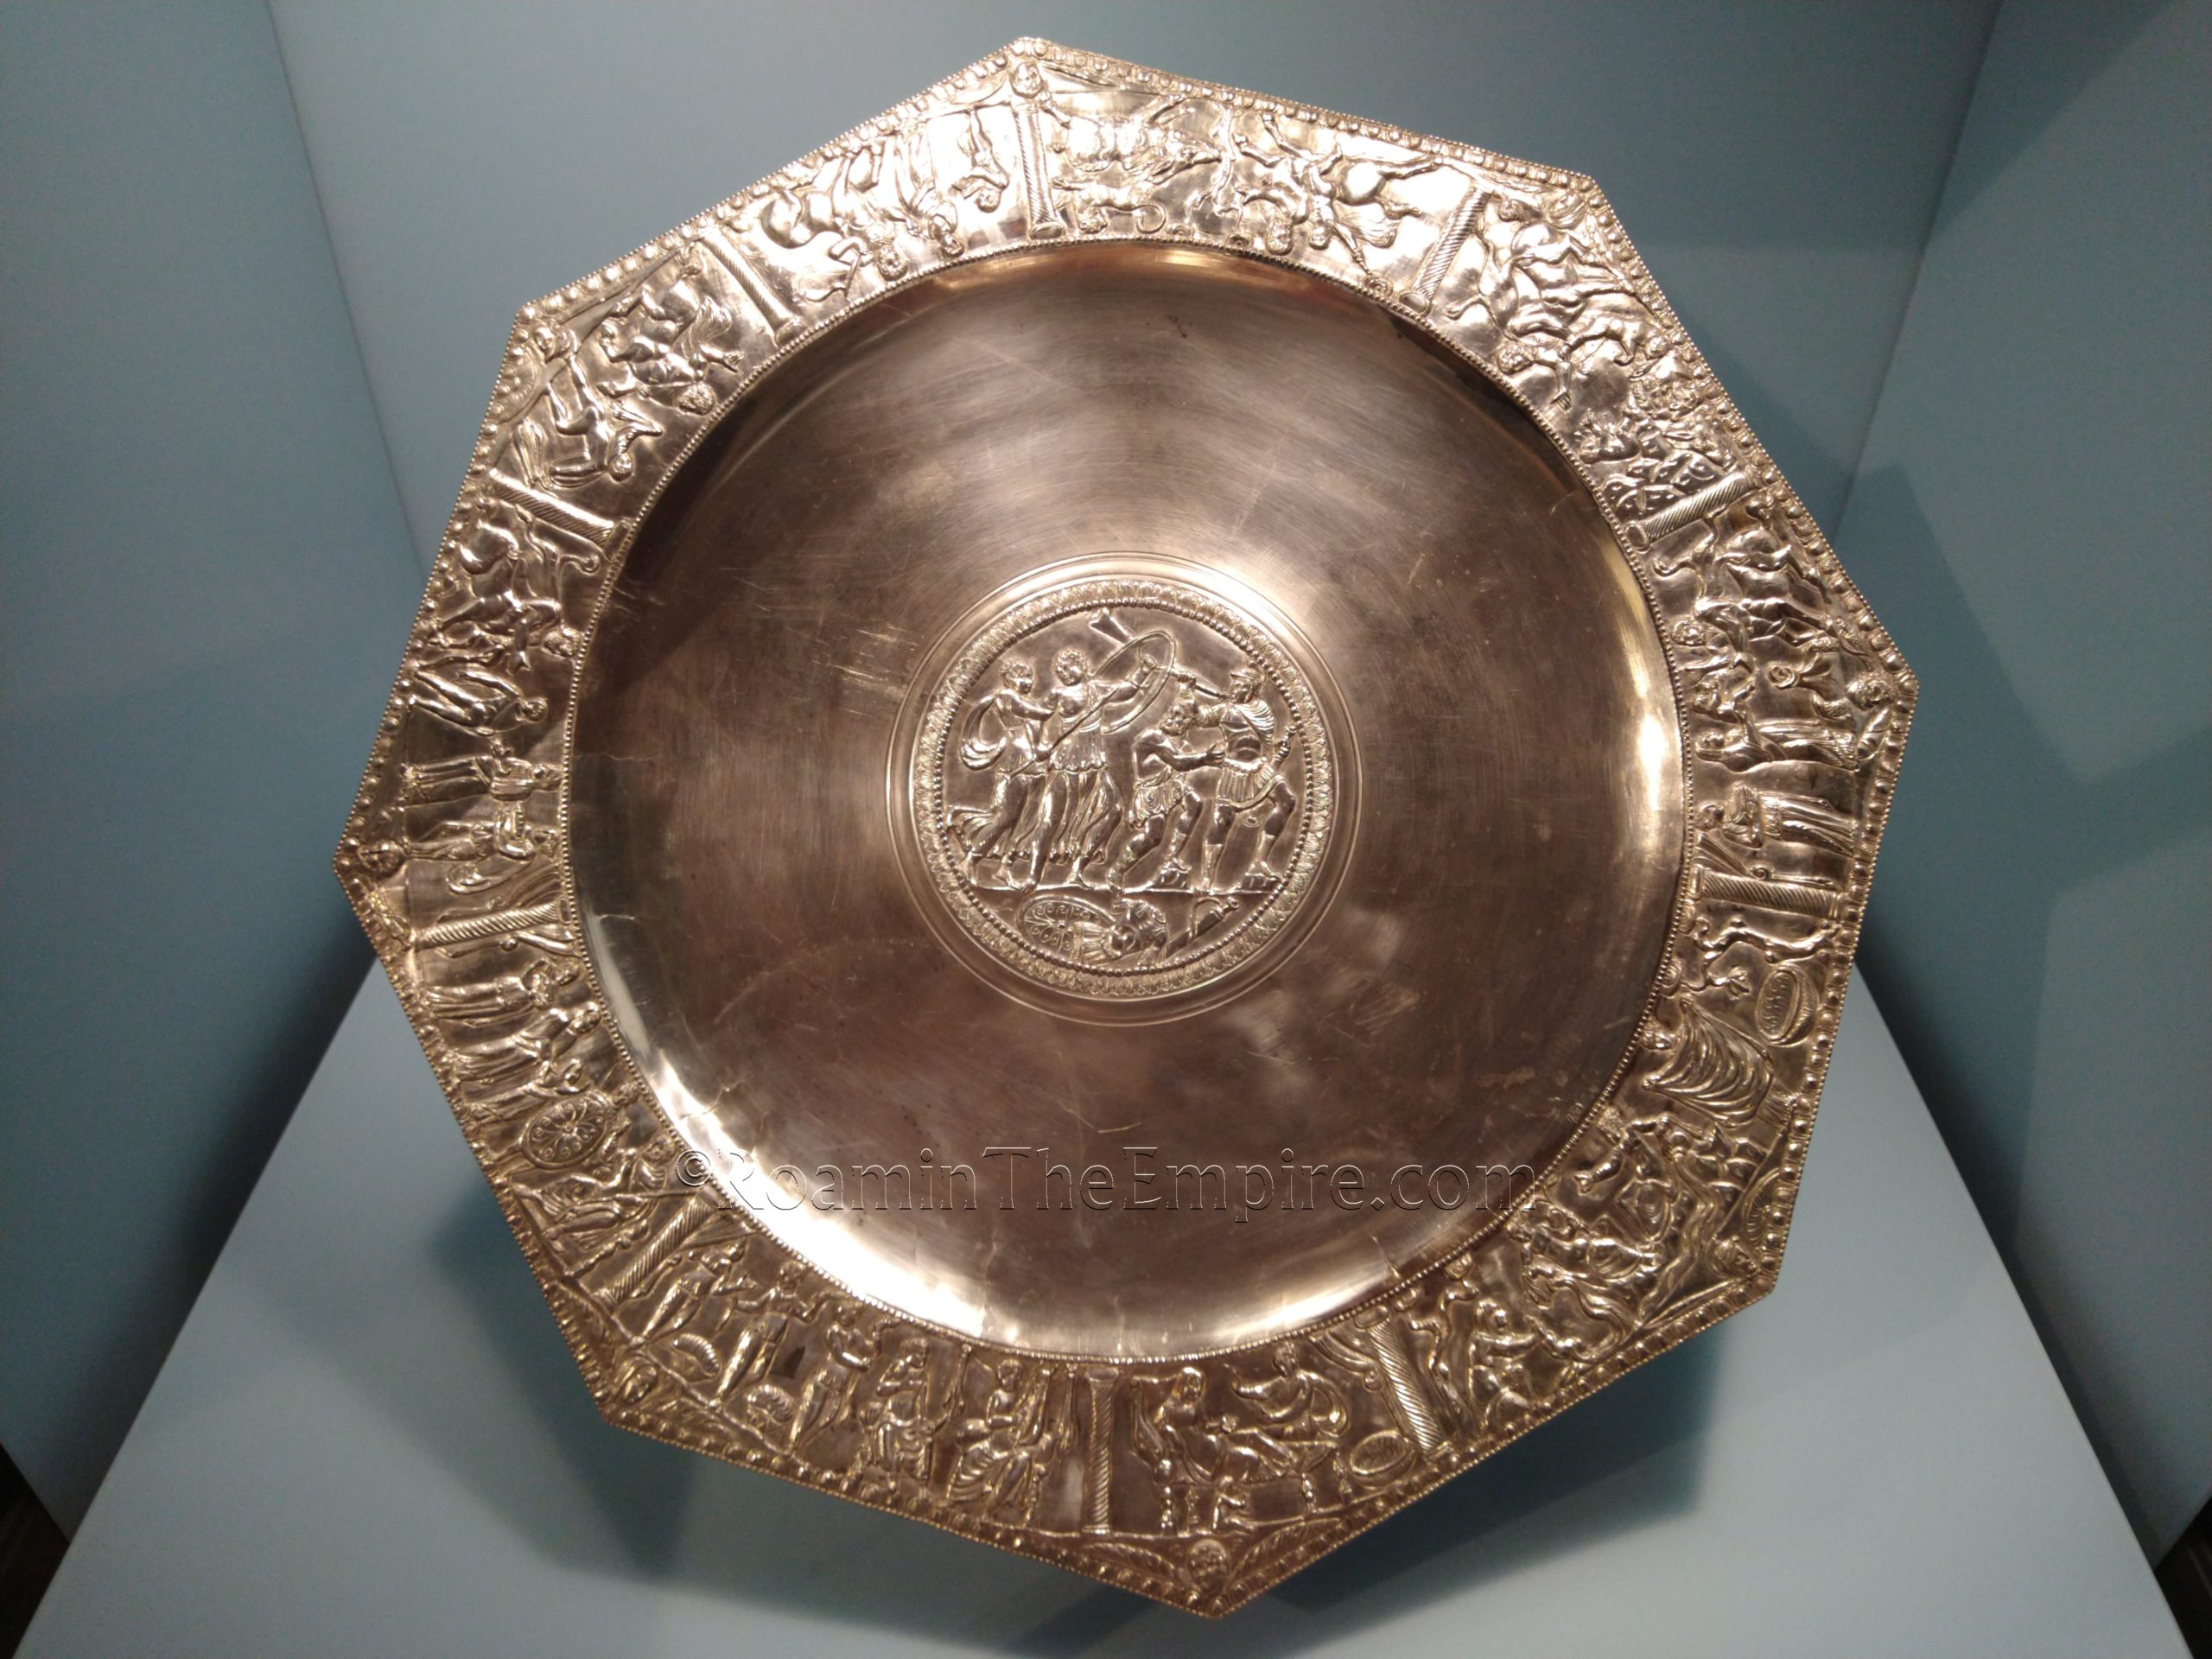 Silver platter decorated by scenes from the early life of Achilles, including his discovery at the court of Lycomedes on Skyros at the center. Museum and Römerhaus Augusta Raurica.